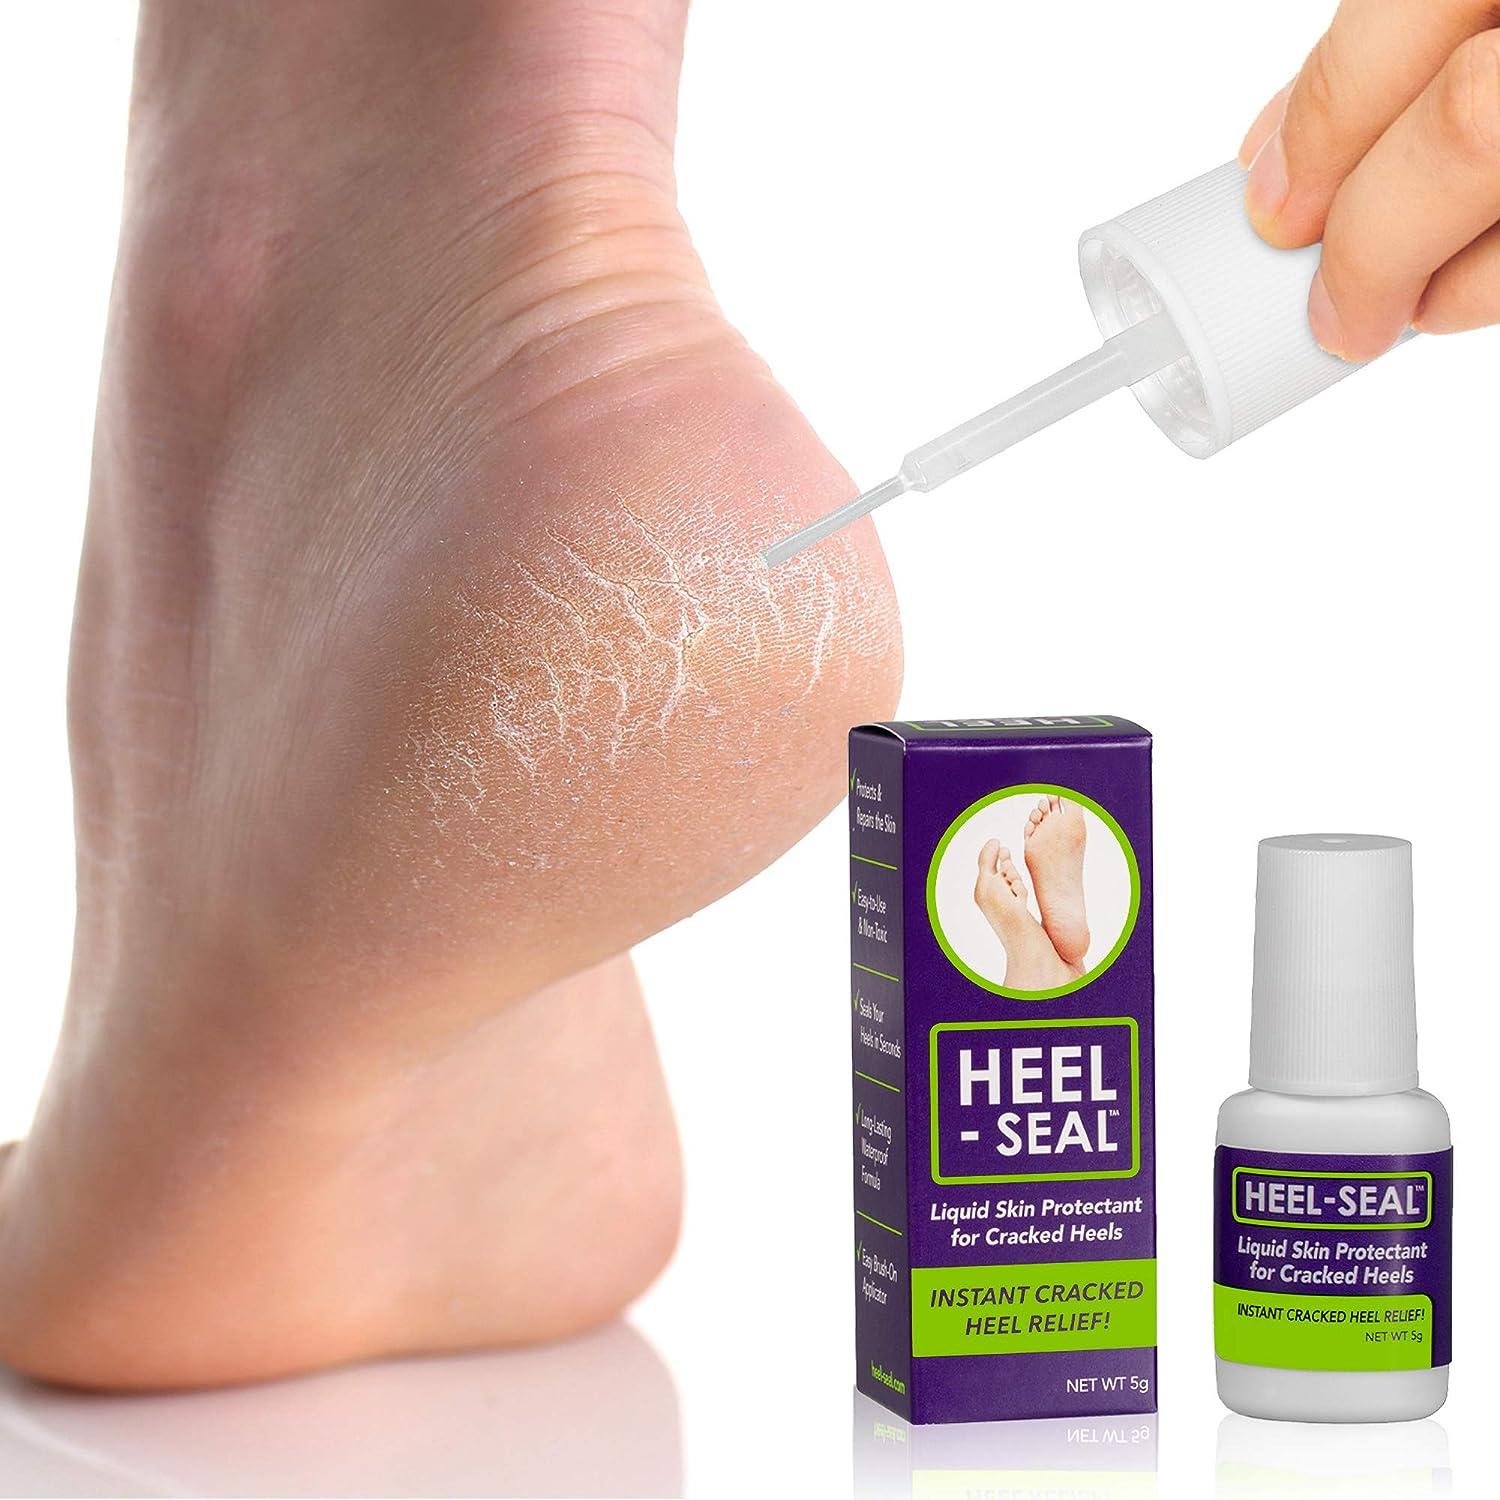 What Are the Best Methods for Treating Cracked Heels? - GoodRx